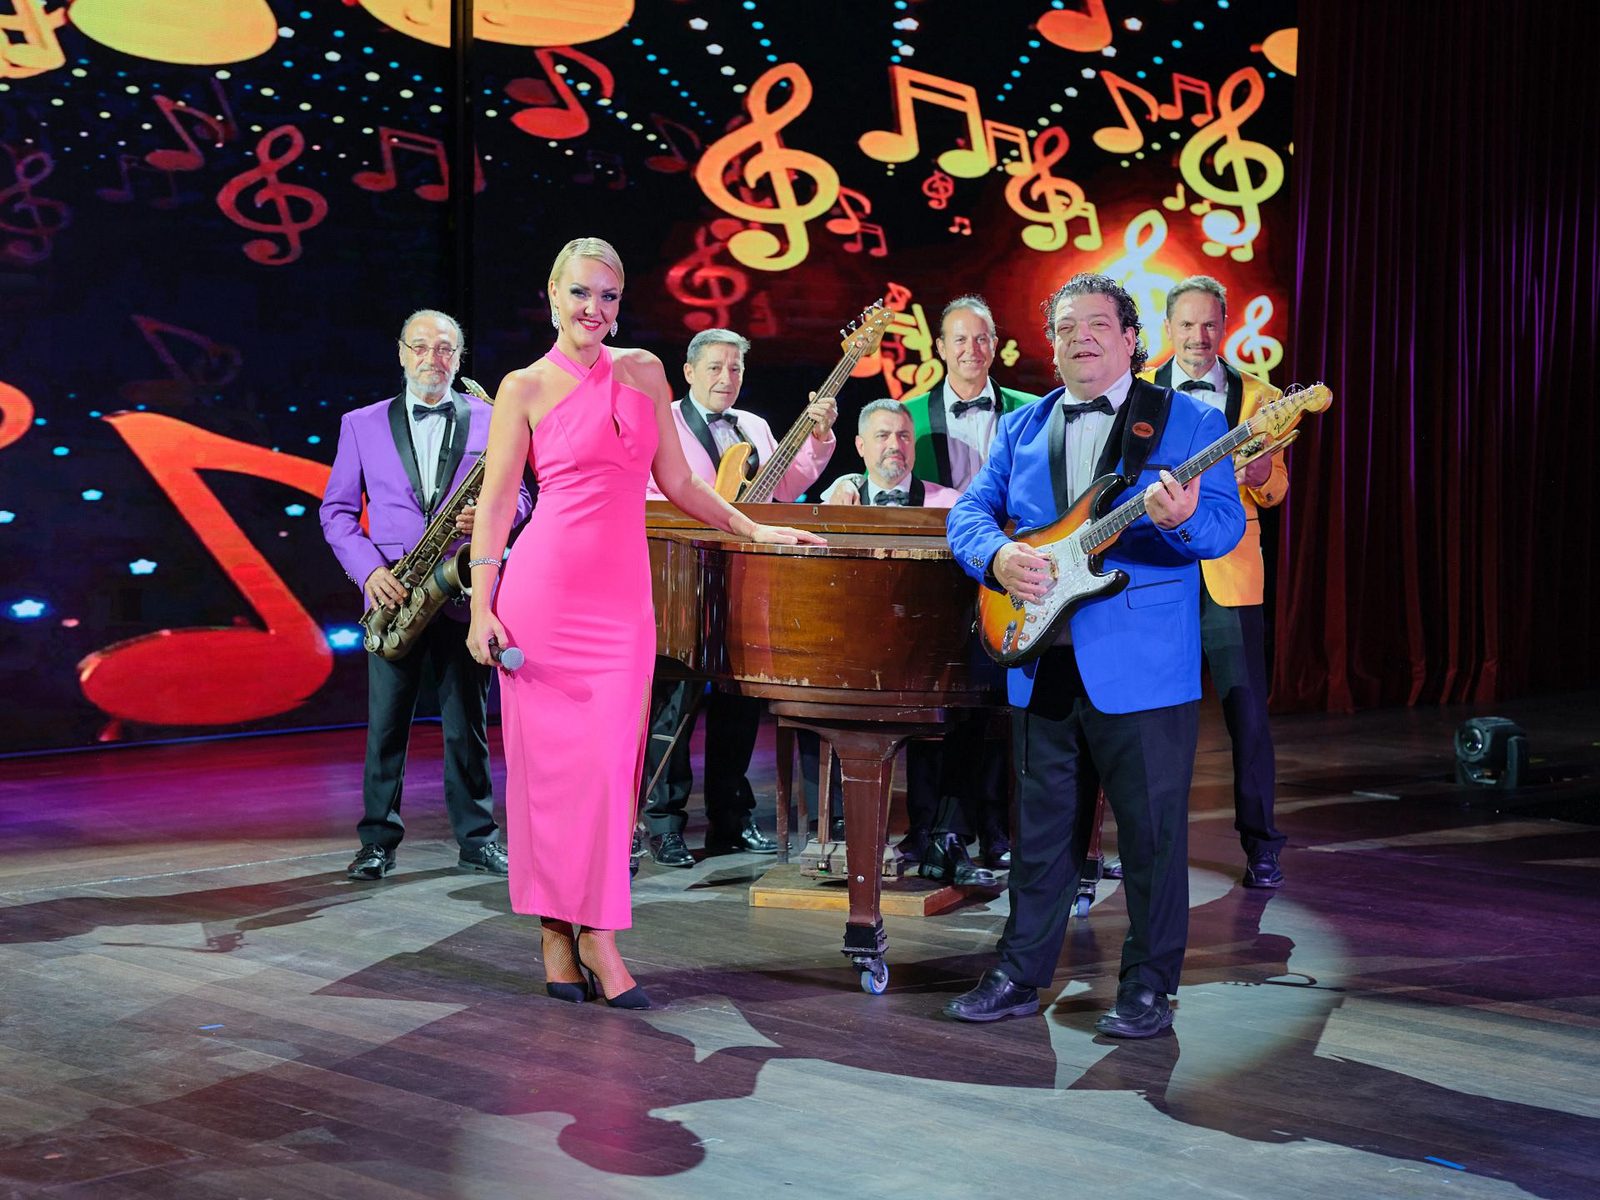 Singer on grand piano with several musicians during the AIRE show in Benidorm Palace